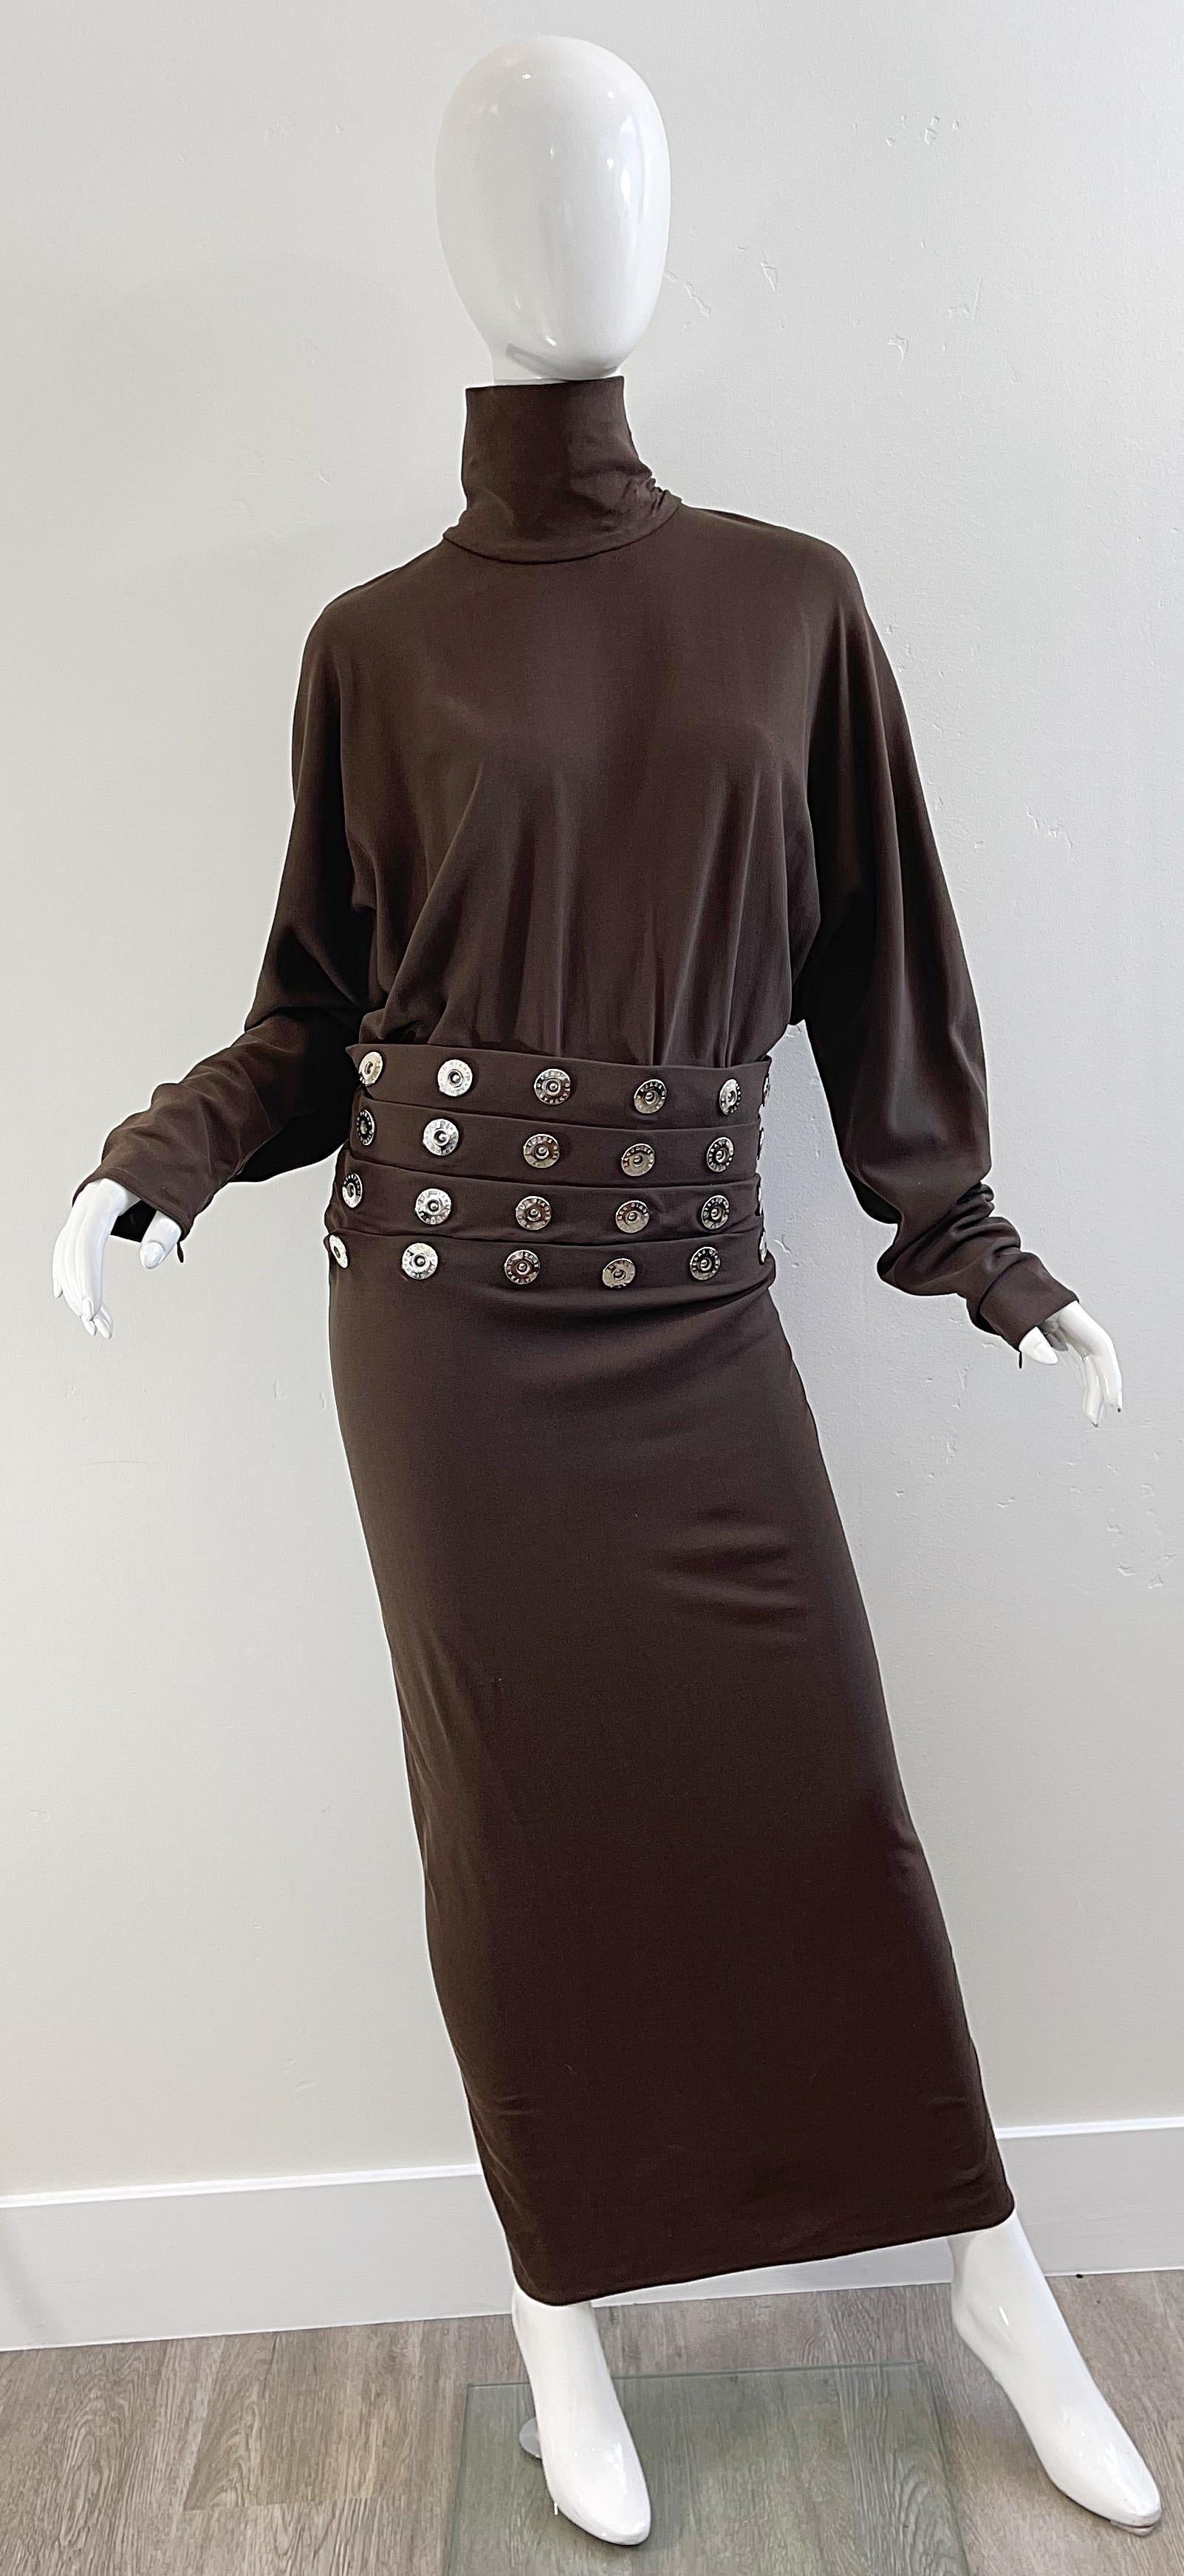 Chic 1990s vintage GIANFRANCO FERRE chocolate brown silver grommet encrusted rayon elastane turtleneck evening dress ! Features logo embossed grommets at drop waist. Hidden zipper up the back with hook-and-eye closure. 
In great unworn